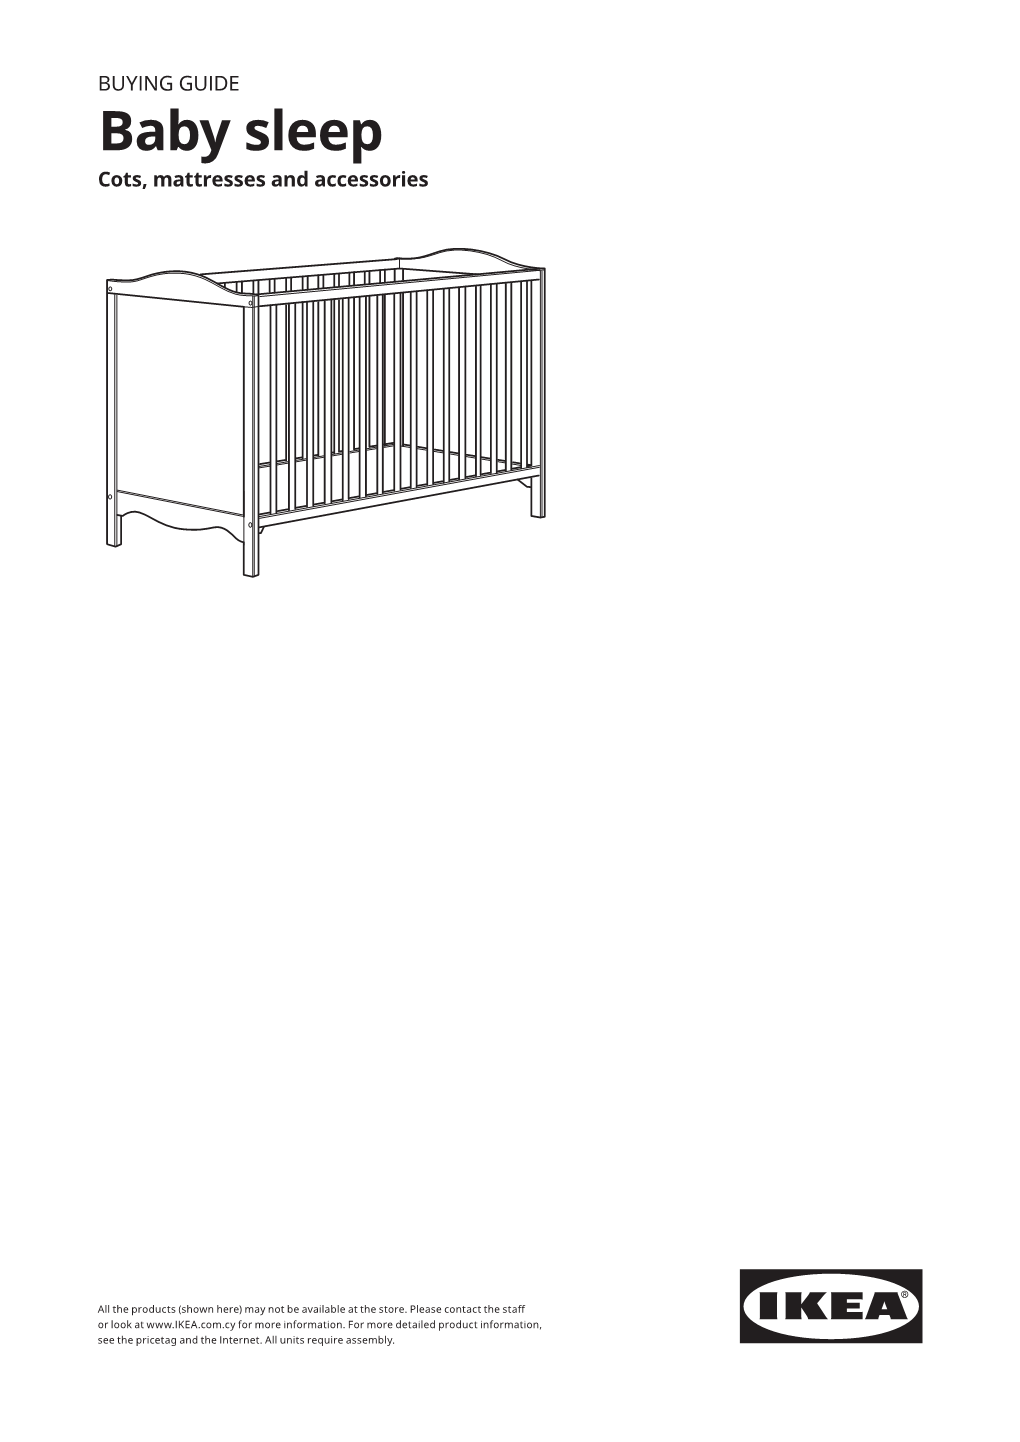 Baby Sleep Cots, Mattresses and Accessories